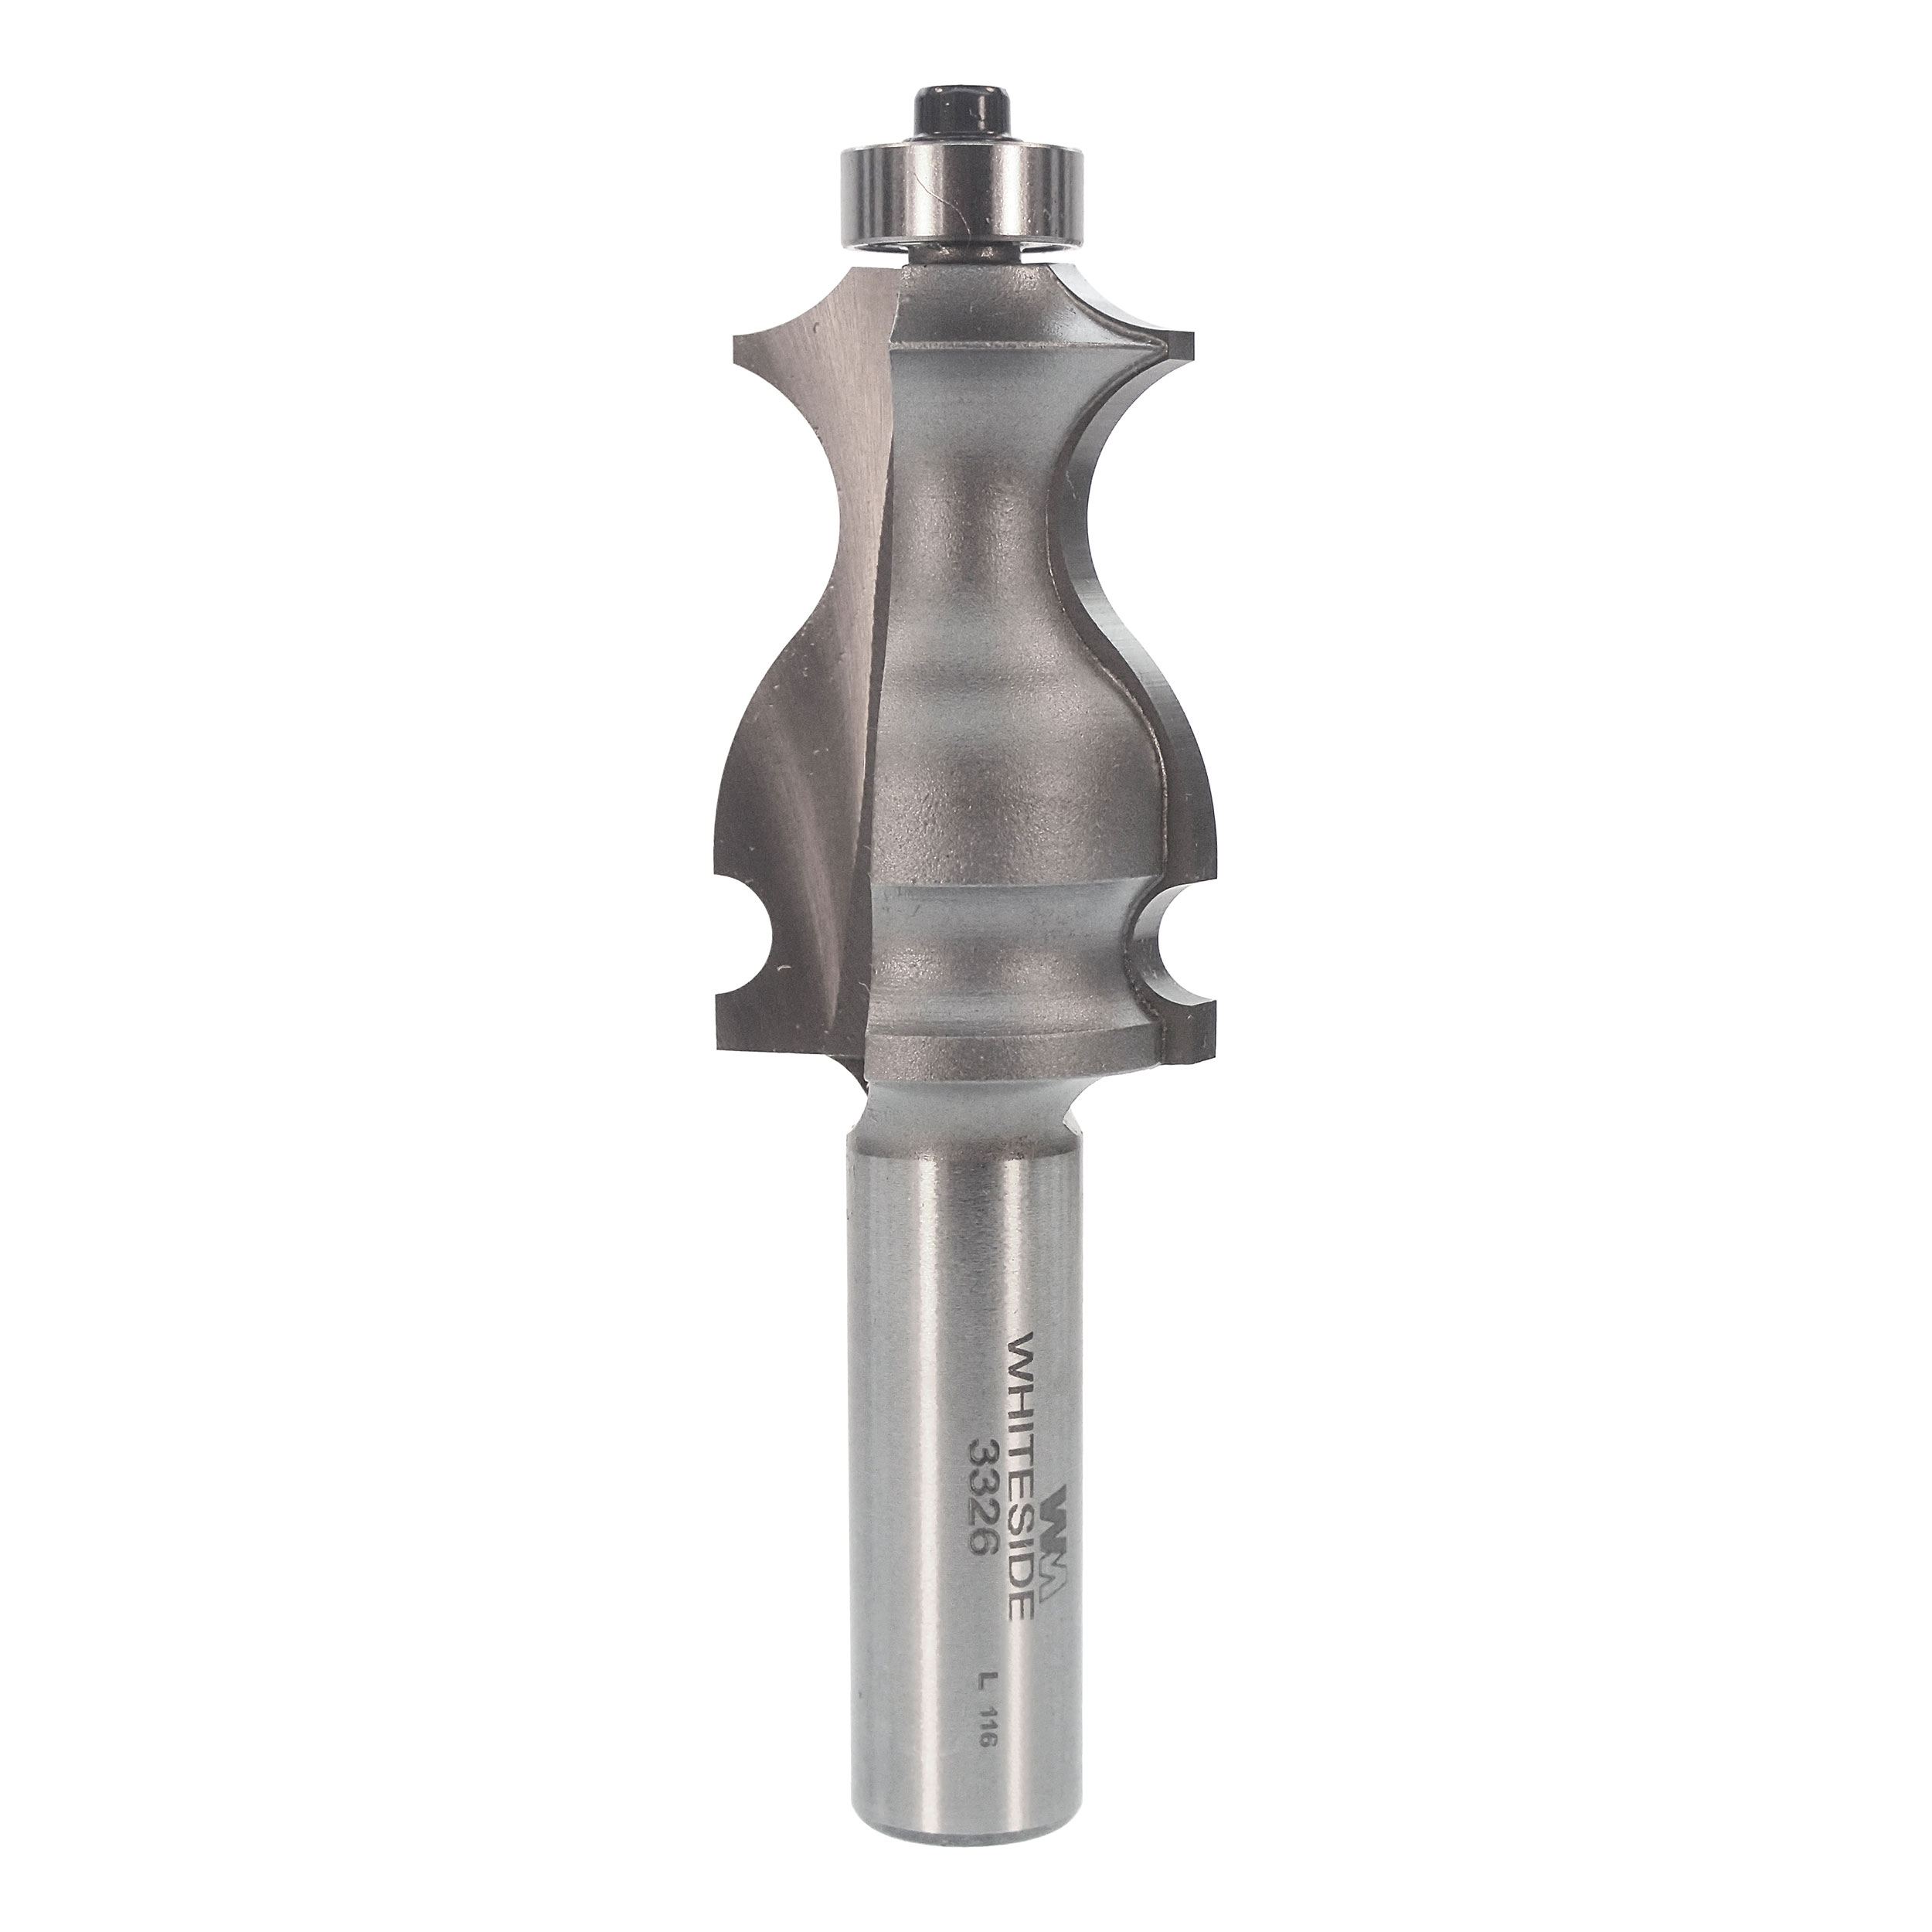 3326 Specialty Molding Router Bit